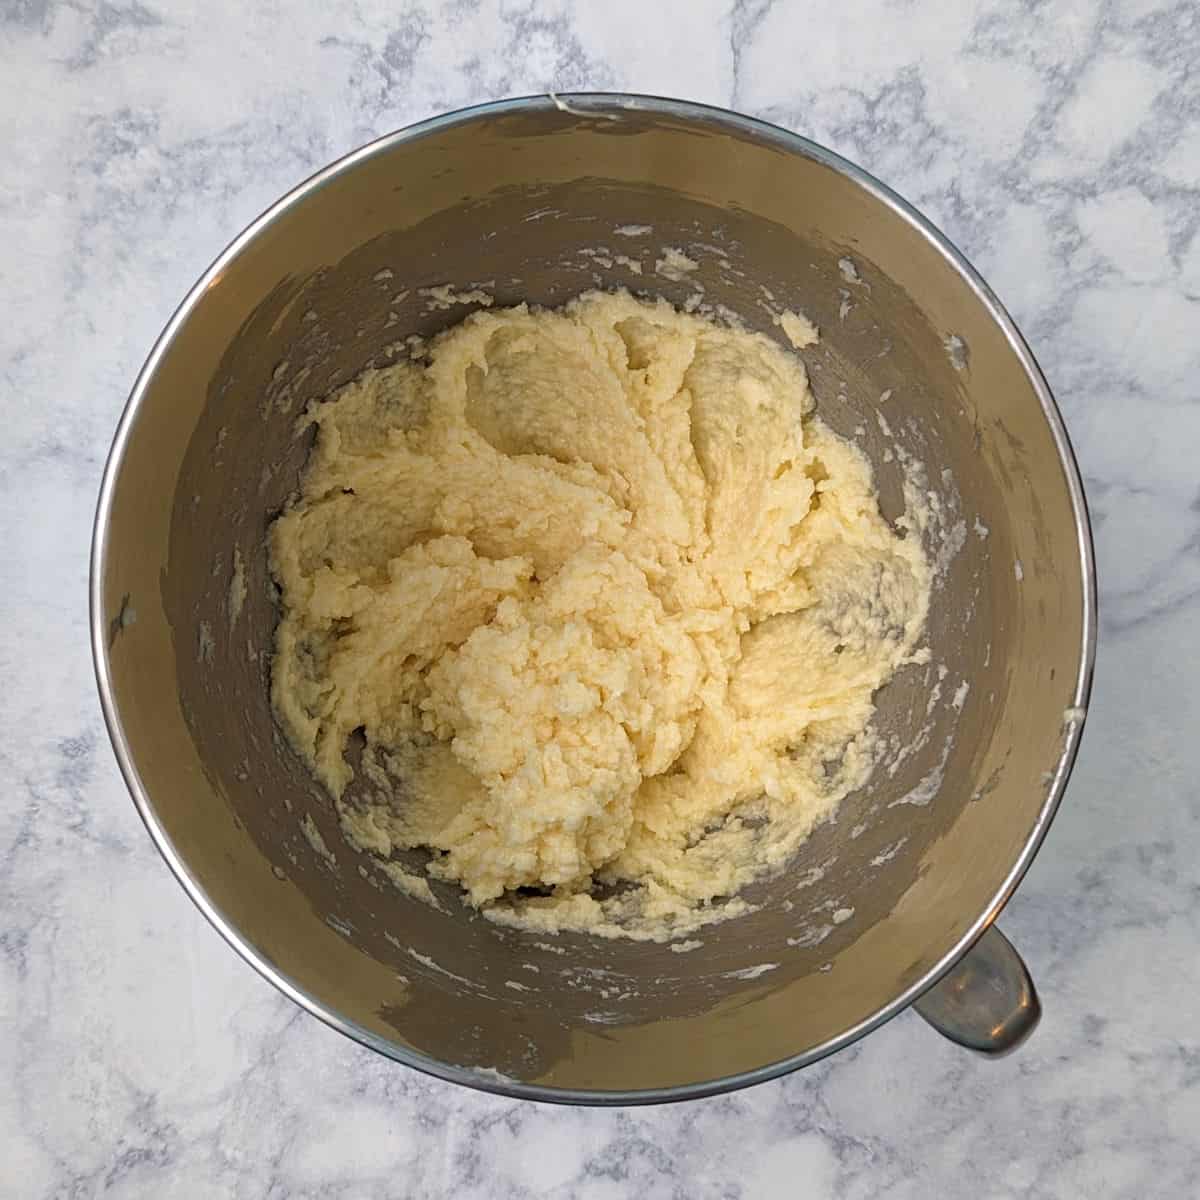 butter, sugar, egg, and vanilla, beaten together in a stand mixer bowl